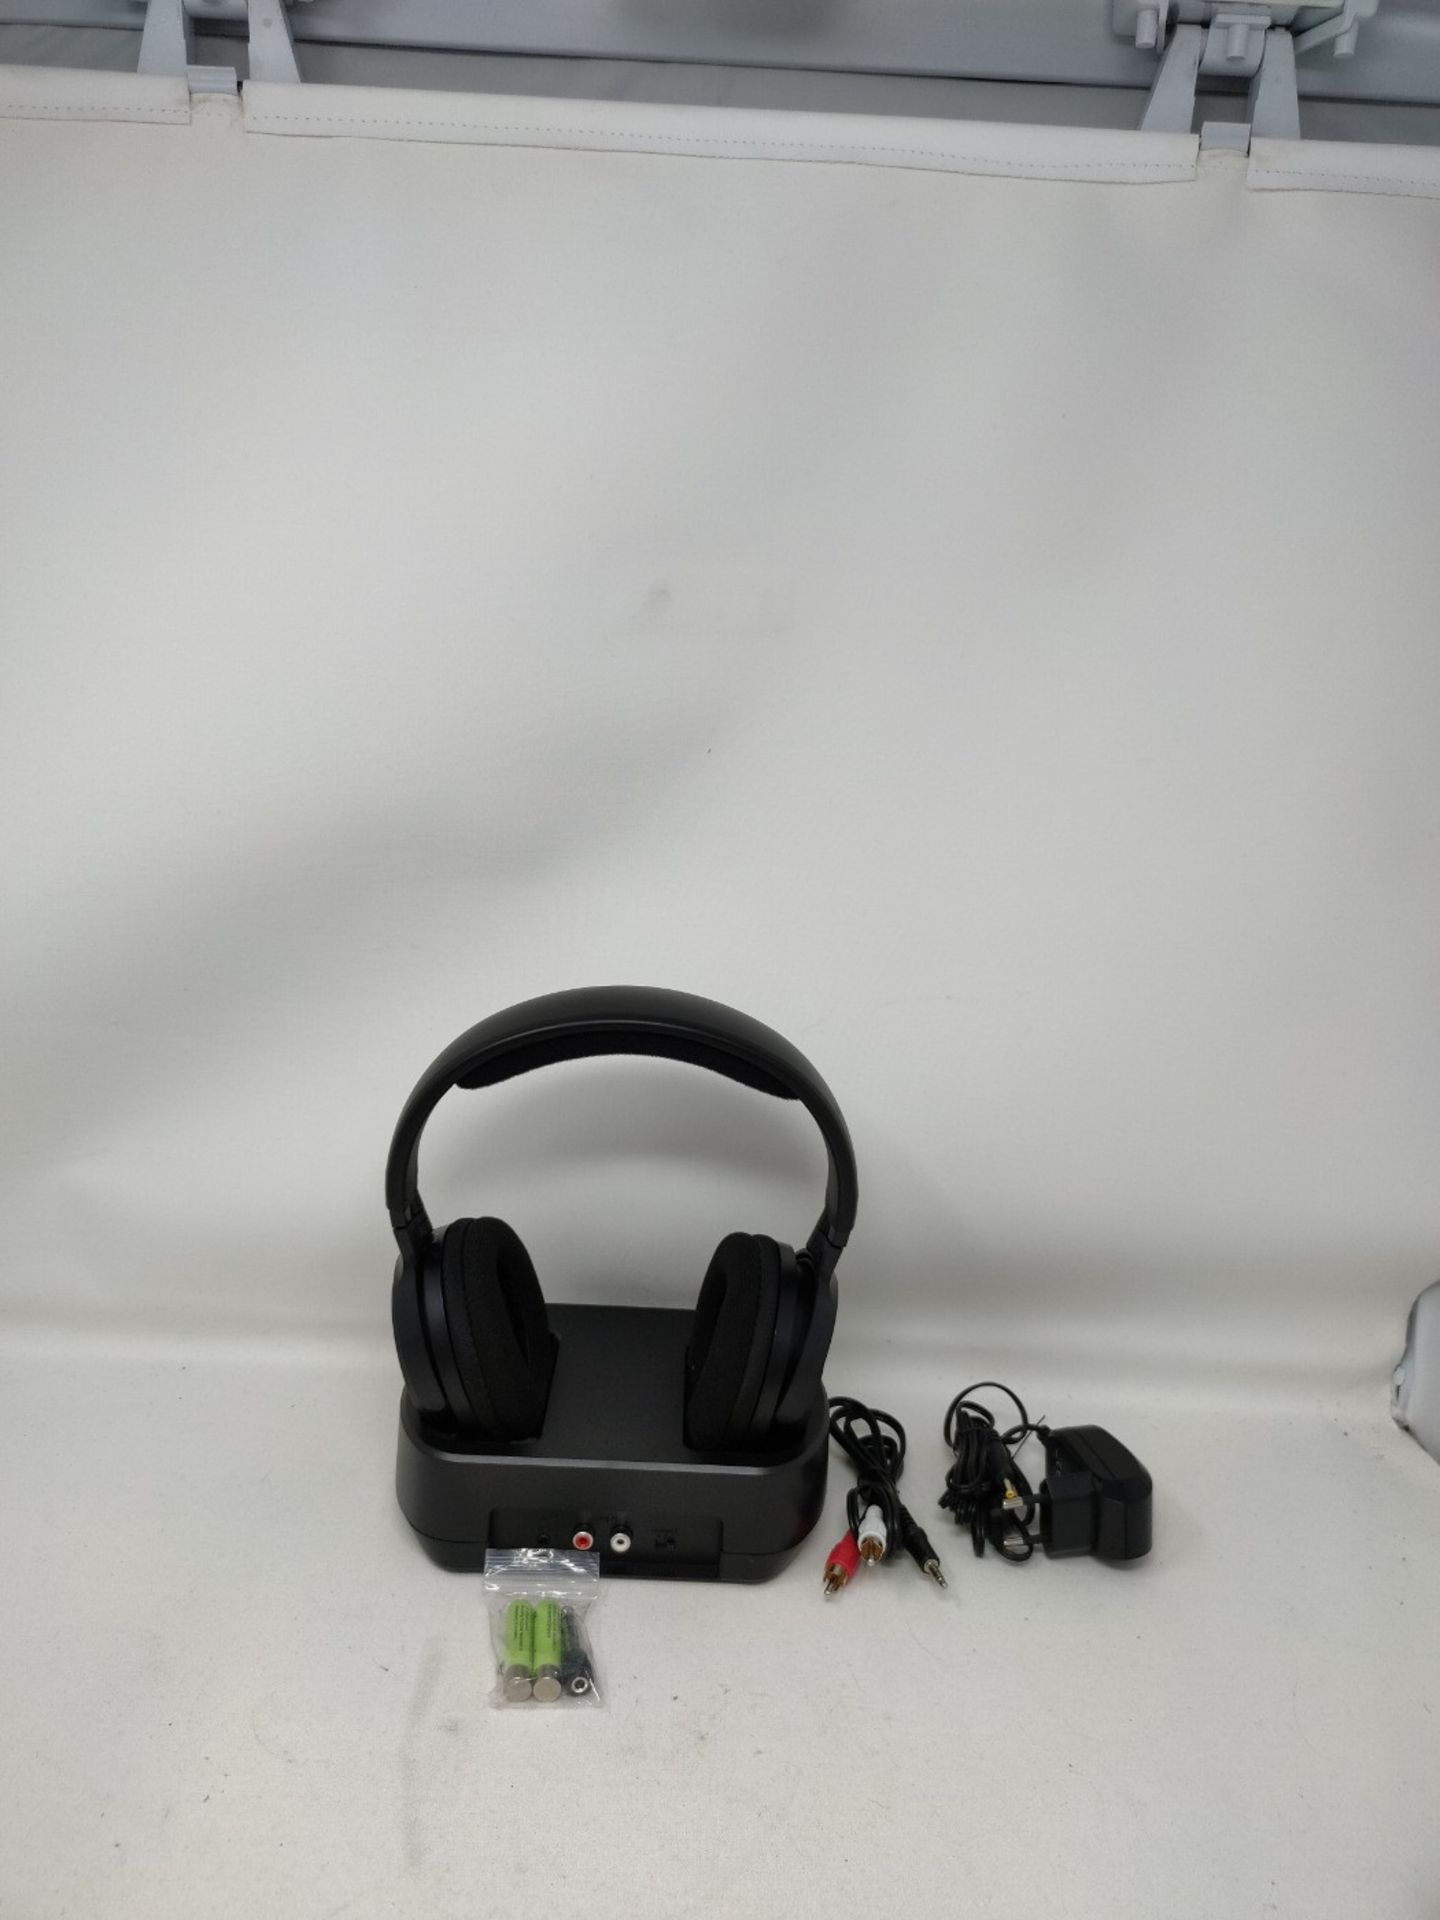 Thomson wireless headphones with charging station (over-ear headphones for TV/TV, wire - Image 3 of 3